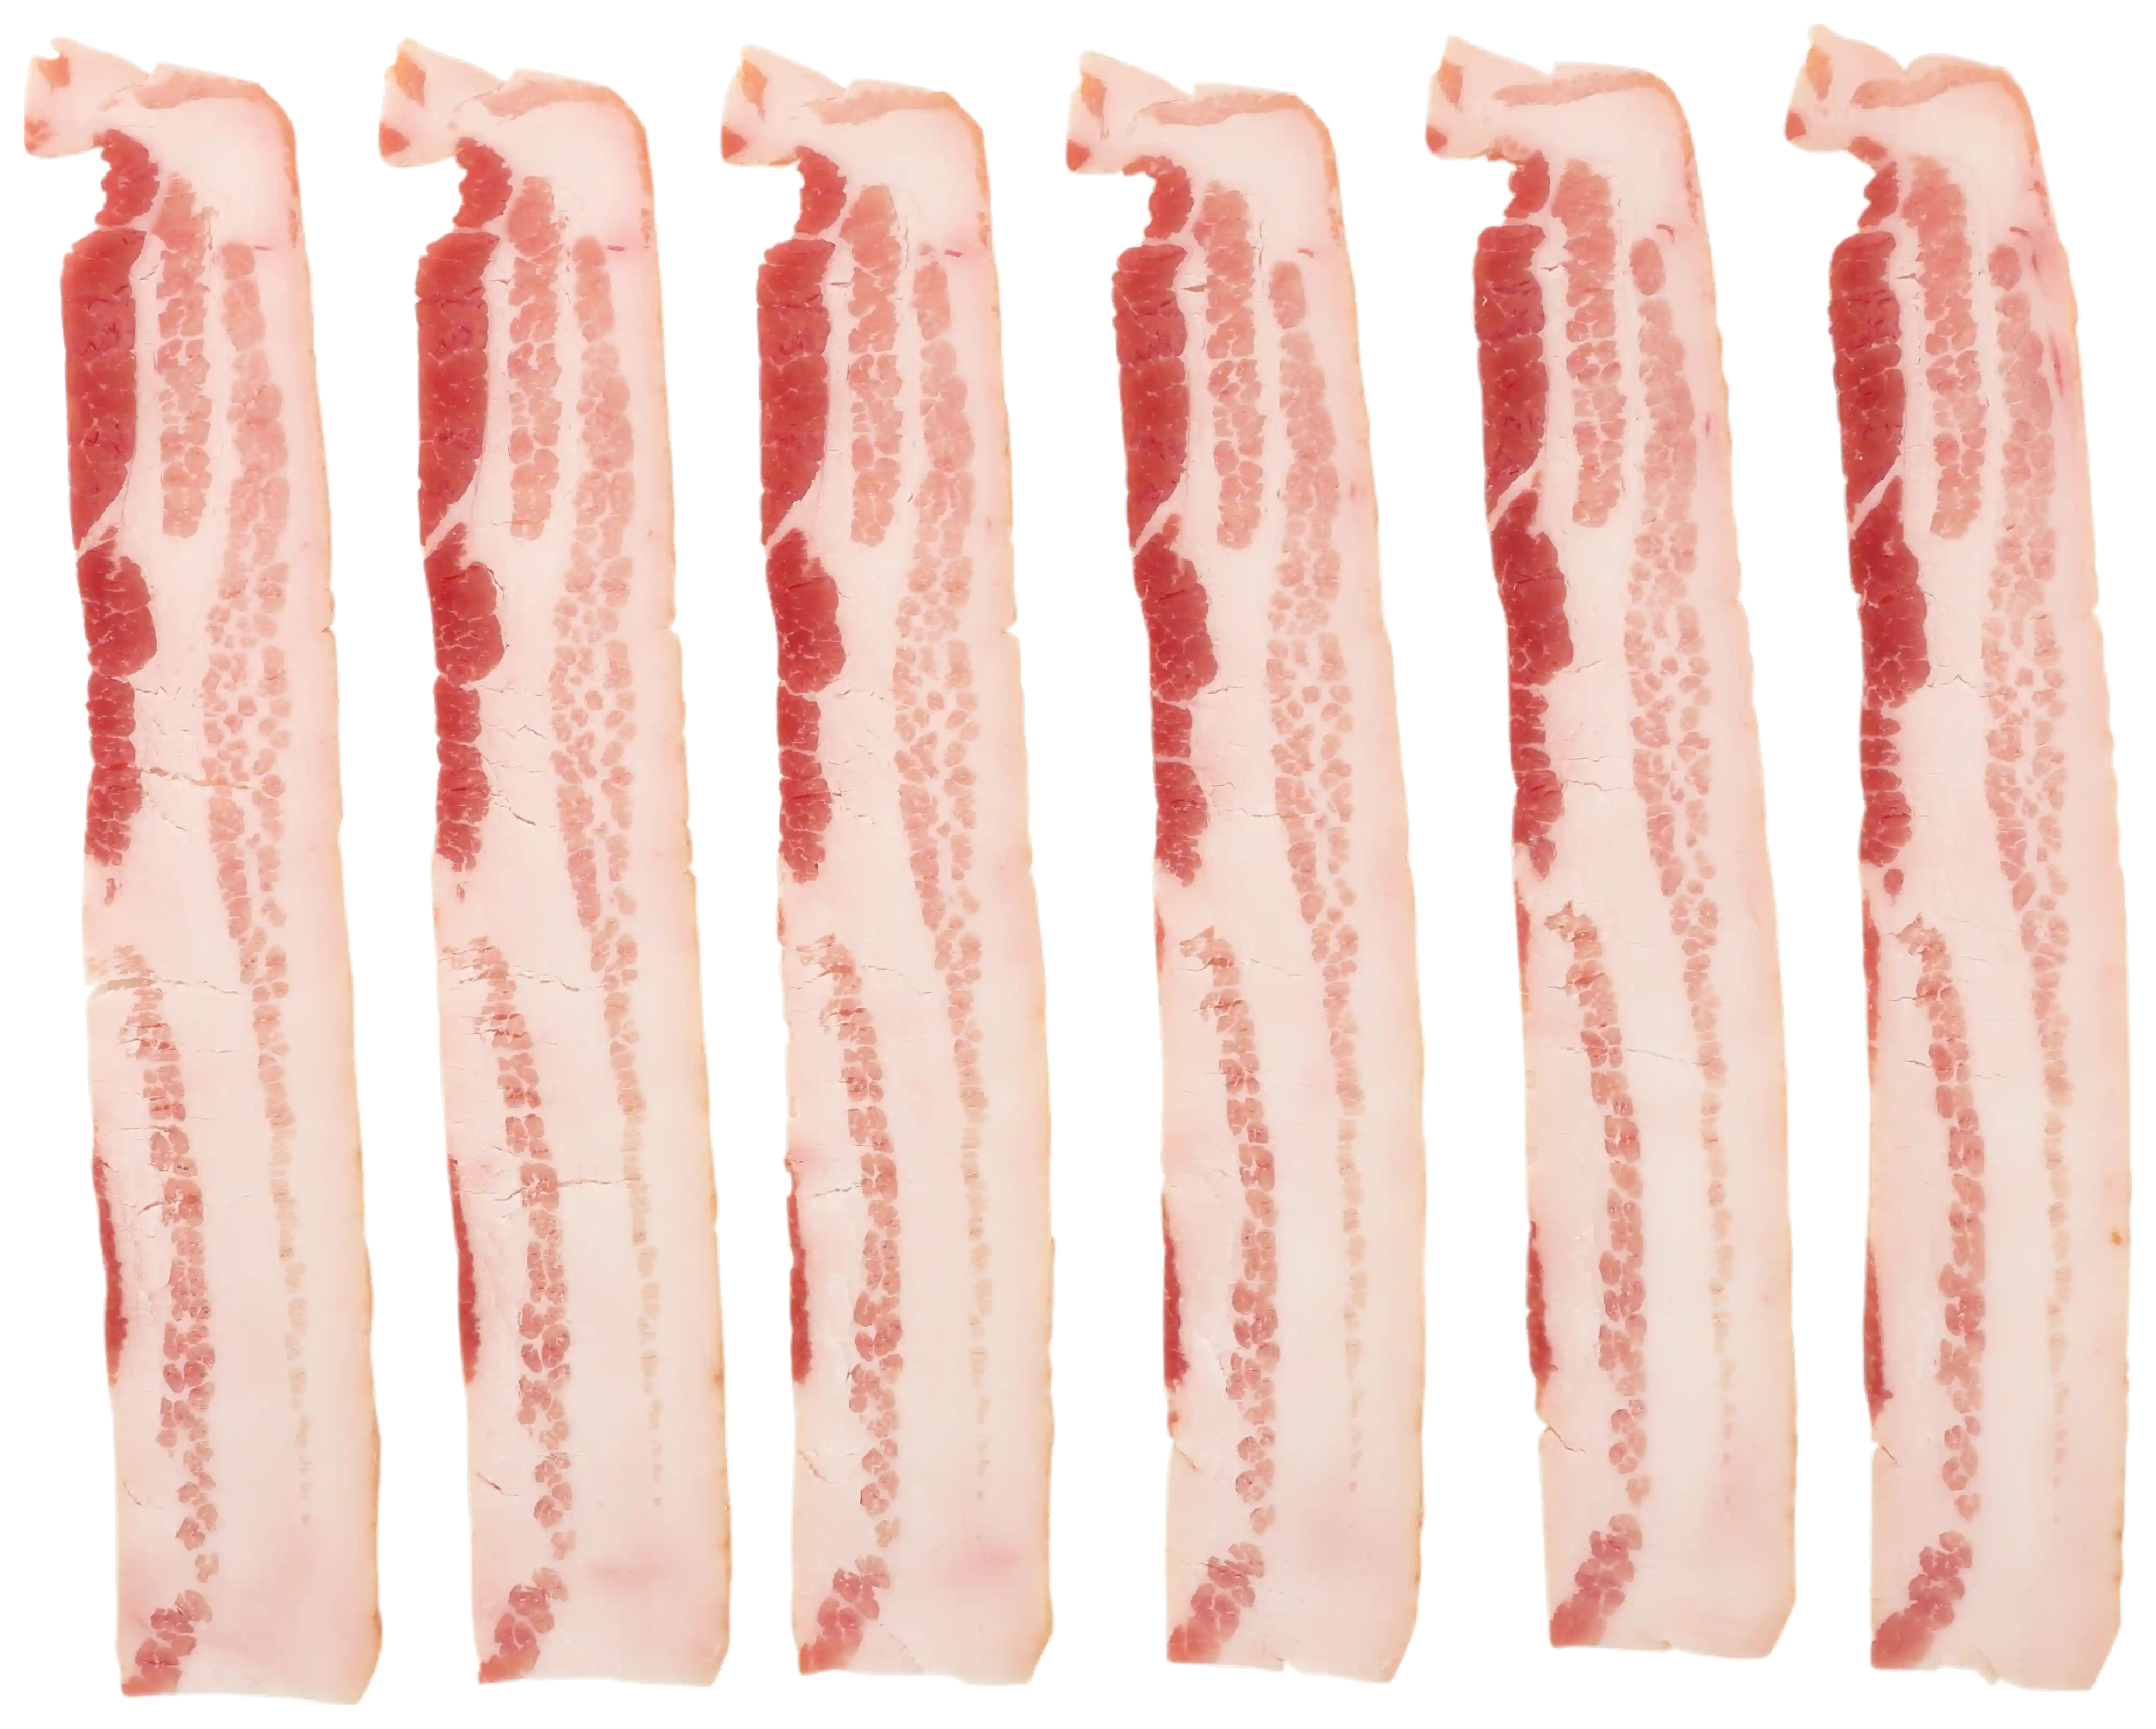 Wright® Brand Naturally Hickory Smoked Extra Thick Sliced Bacon, Bulk, 15 Lbs, 8-10 Slices per Pound, Frozen_image_21